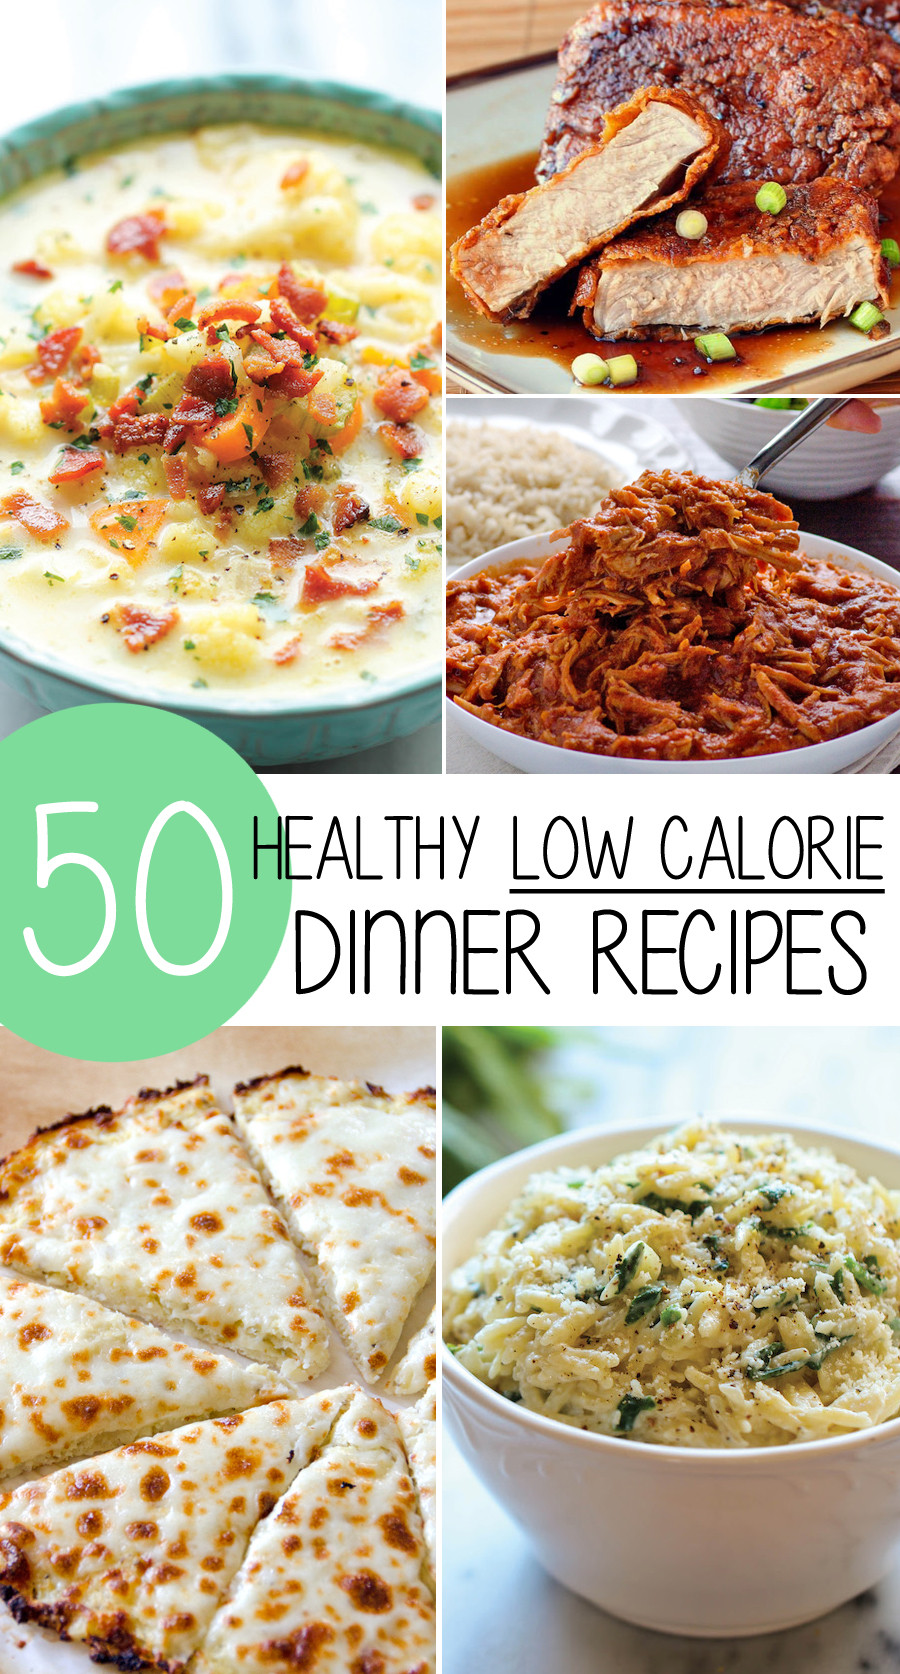 Low Calorie Dinner Ideas
 50 Healthy Low Calorie Weight Loss Dinner Recipes